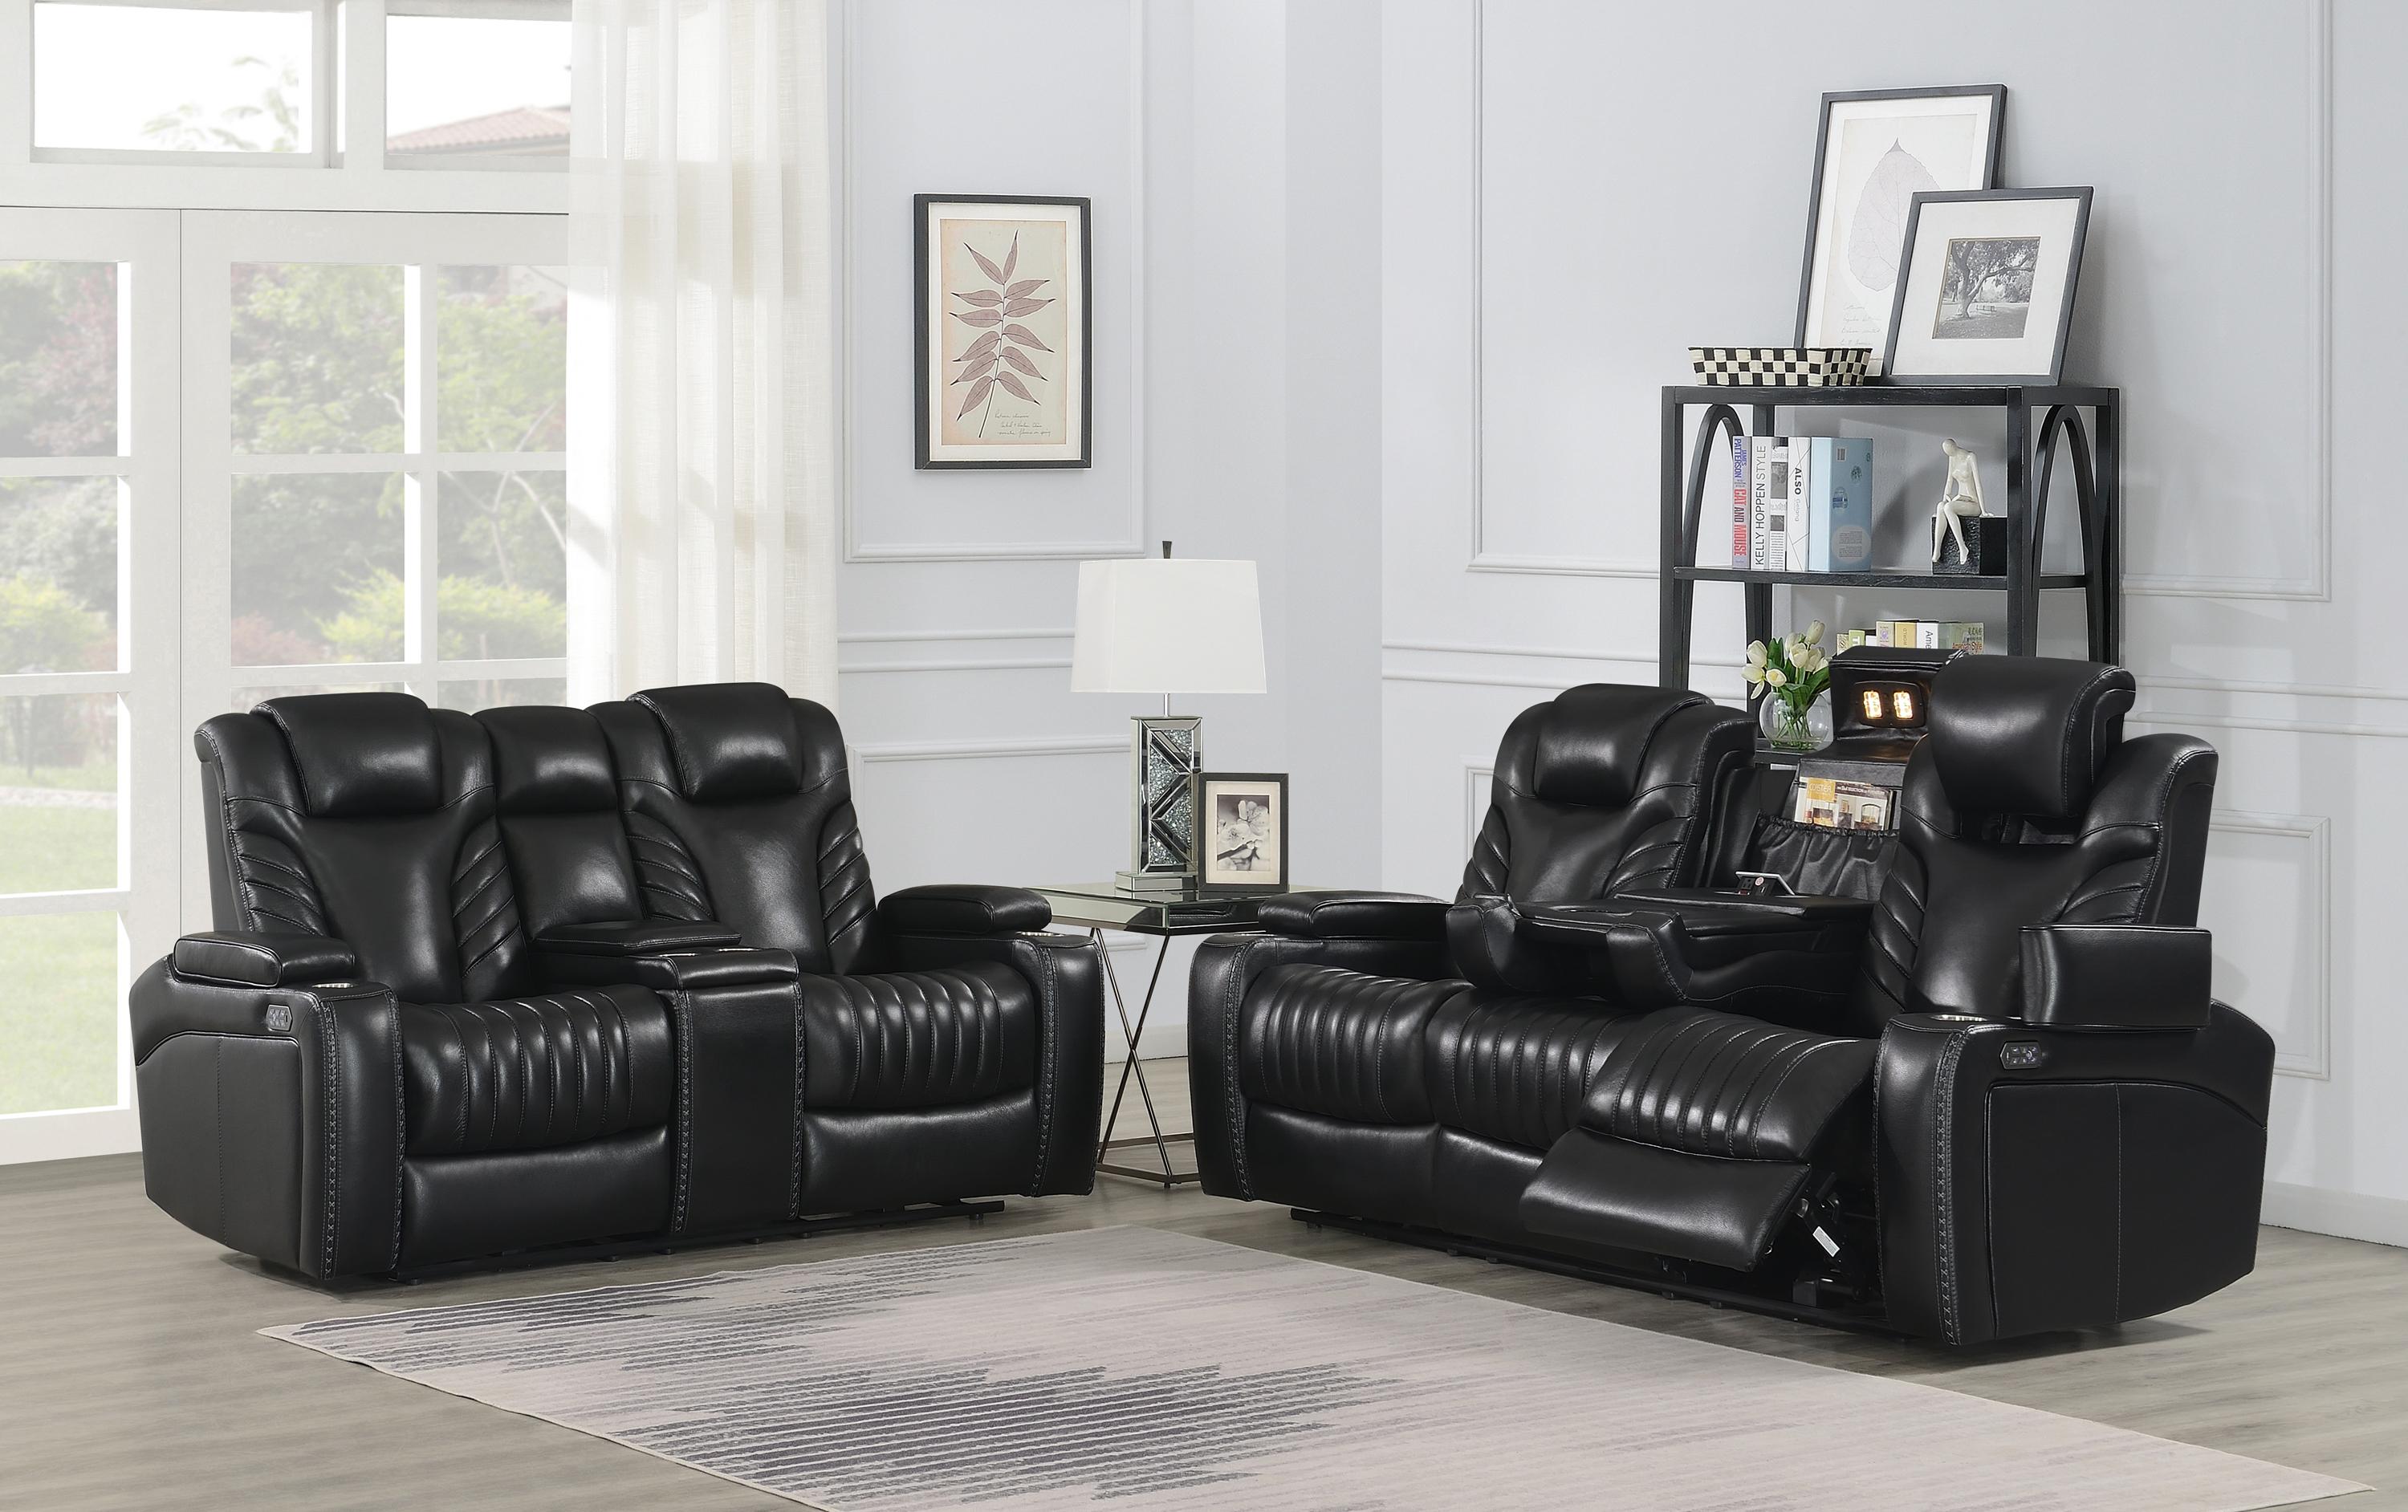 Contemporary Power Sofa Set 609461PPI-S2 Bismark 609461PPI-S2 in Black Leather